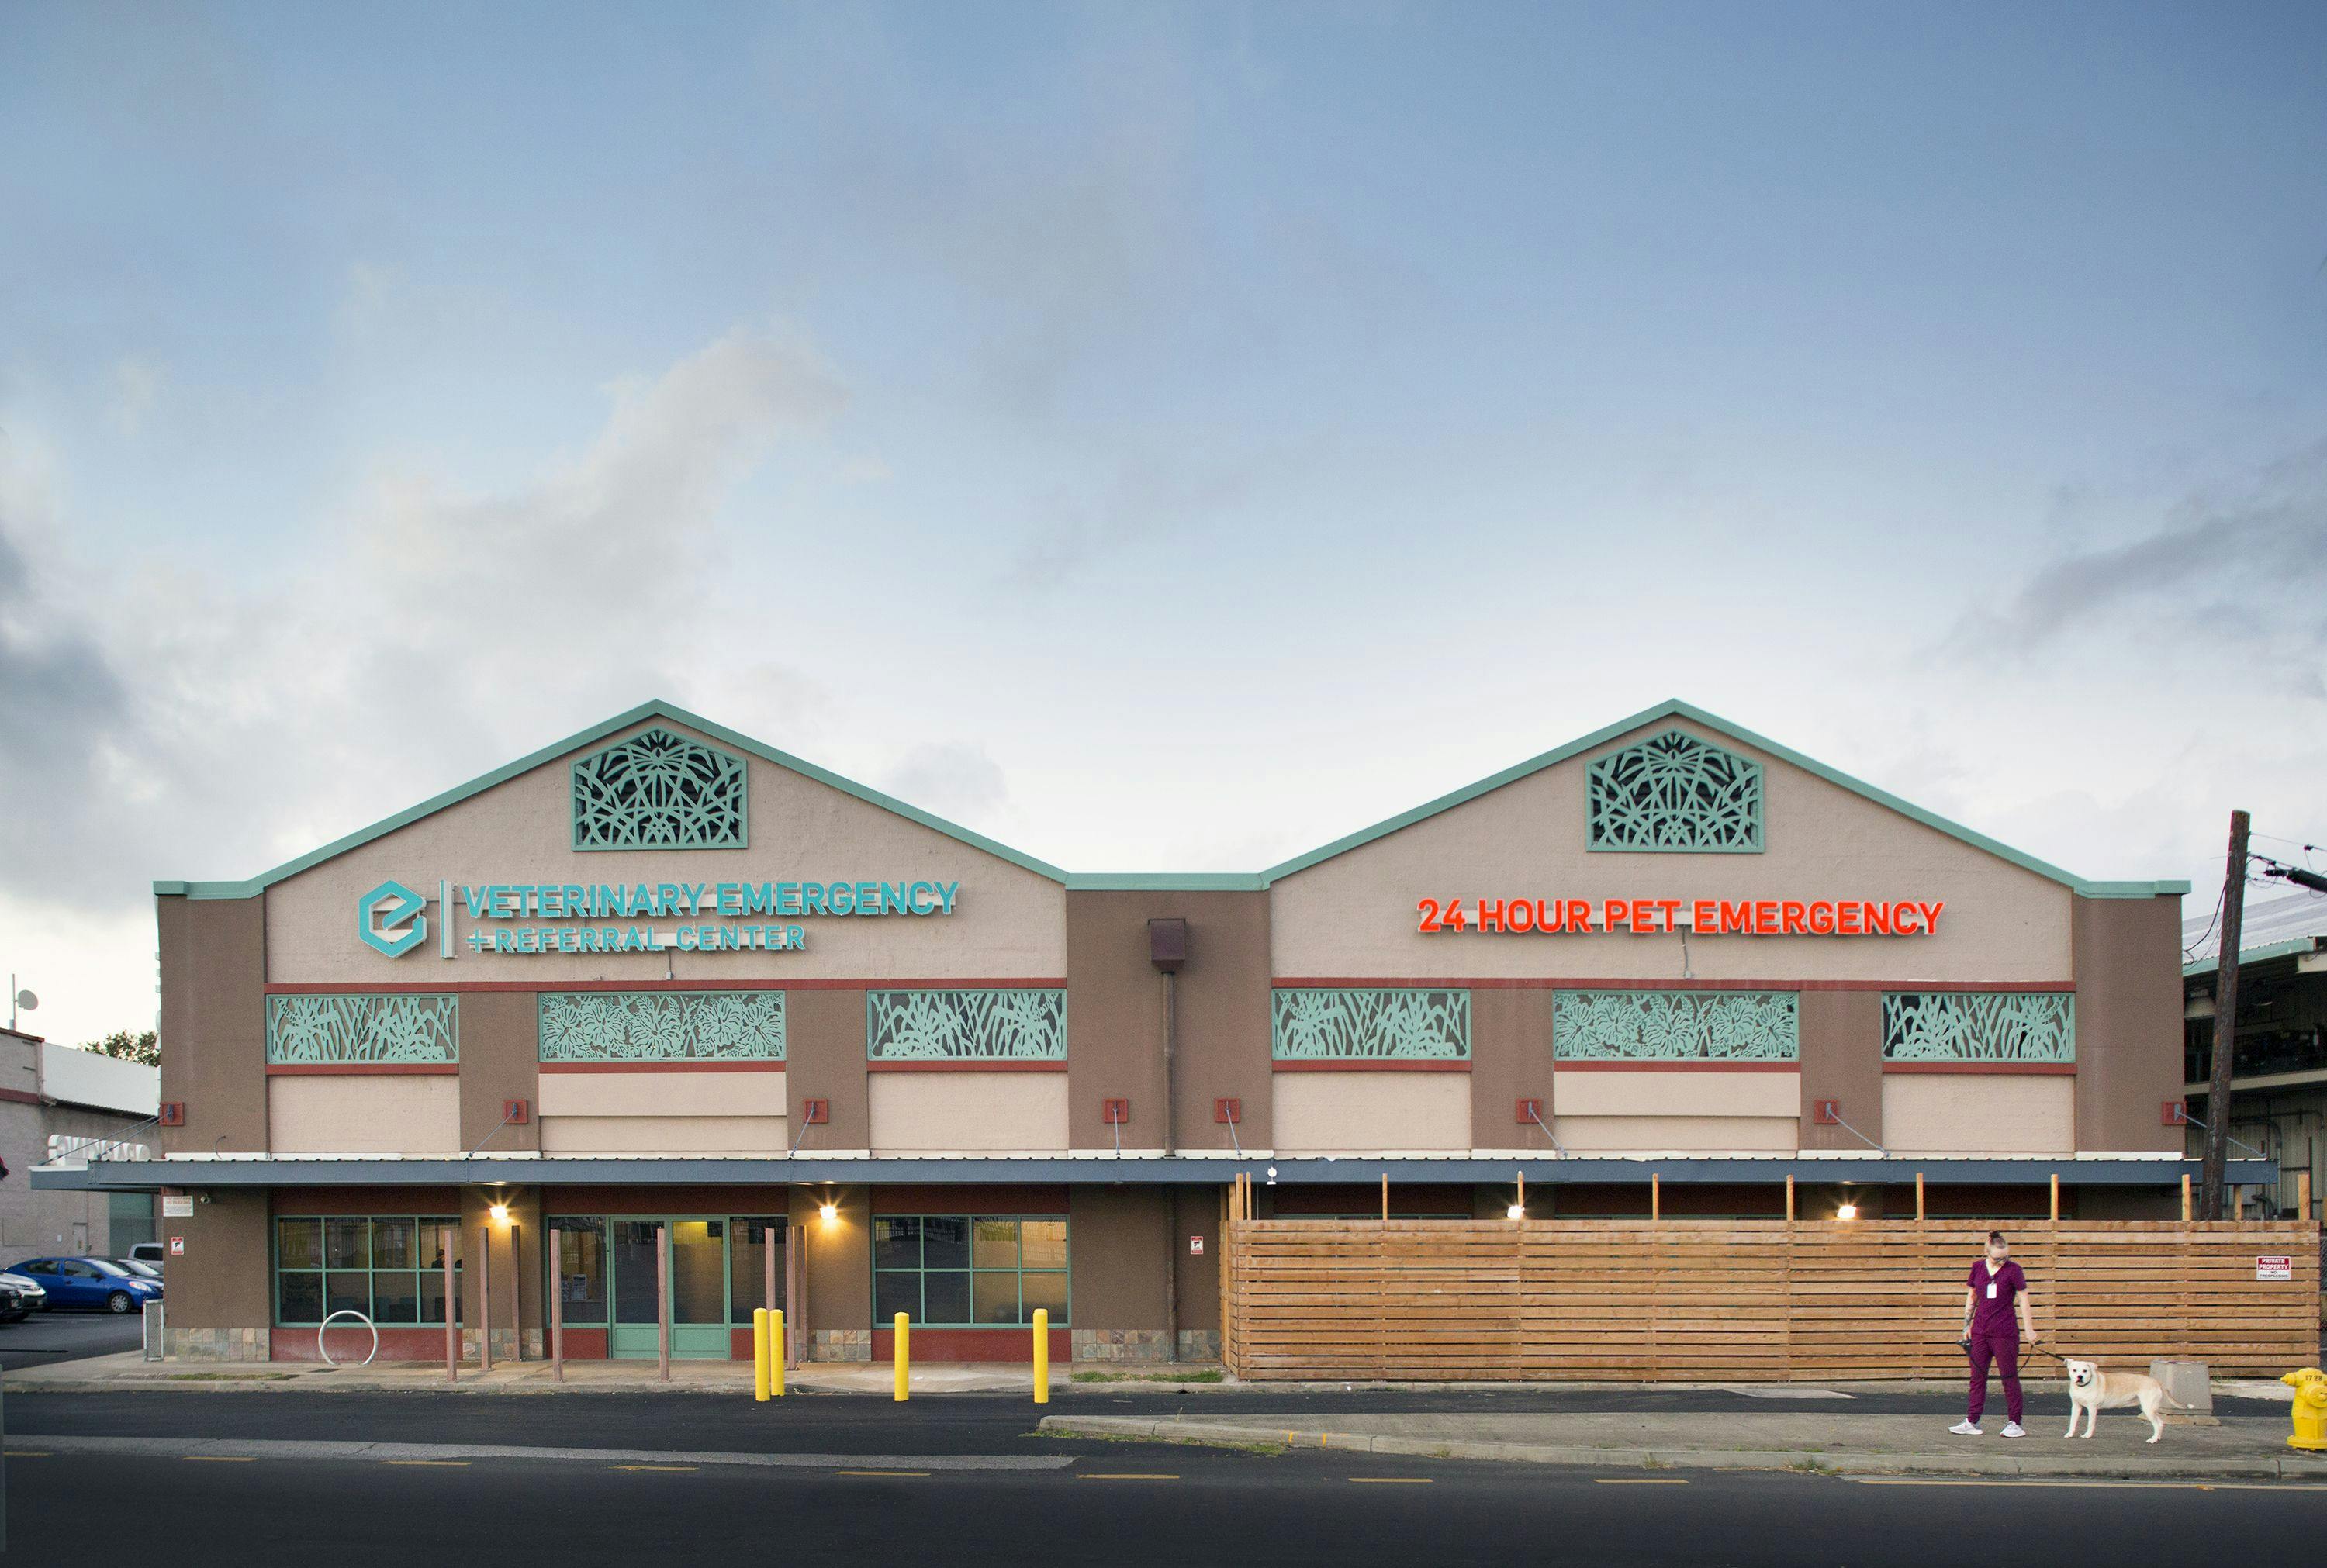 Saying aloha to Hawaii’s first emergency and specialty veterinary hospital